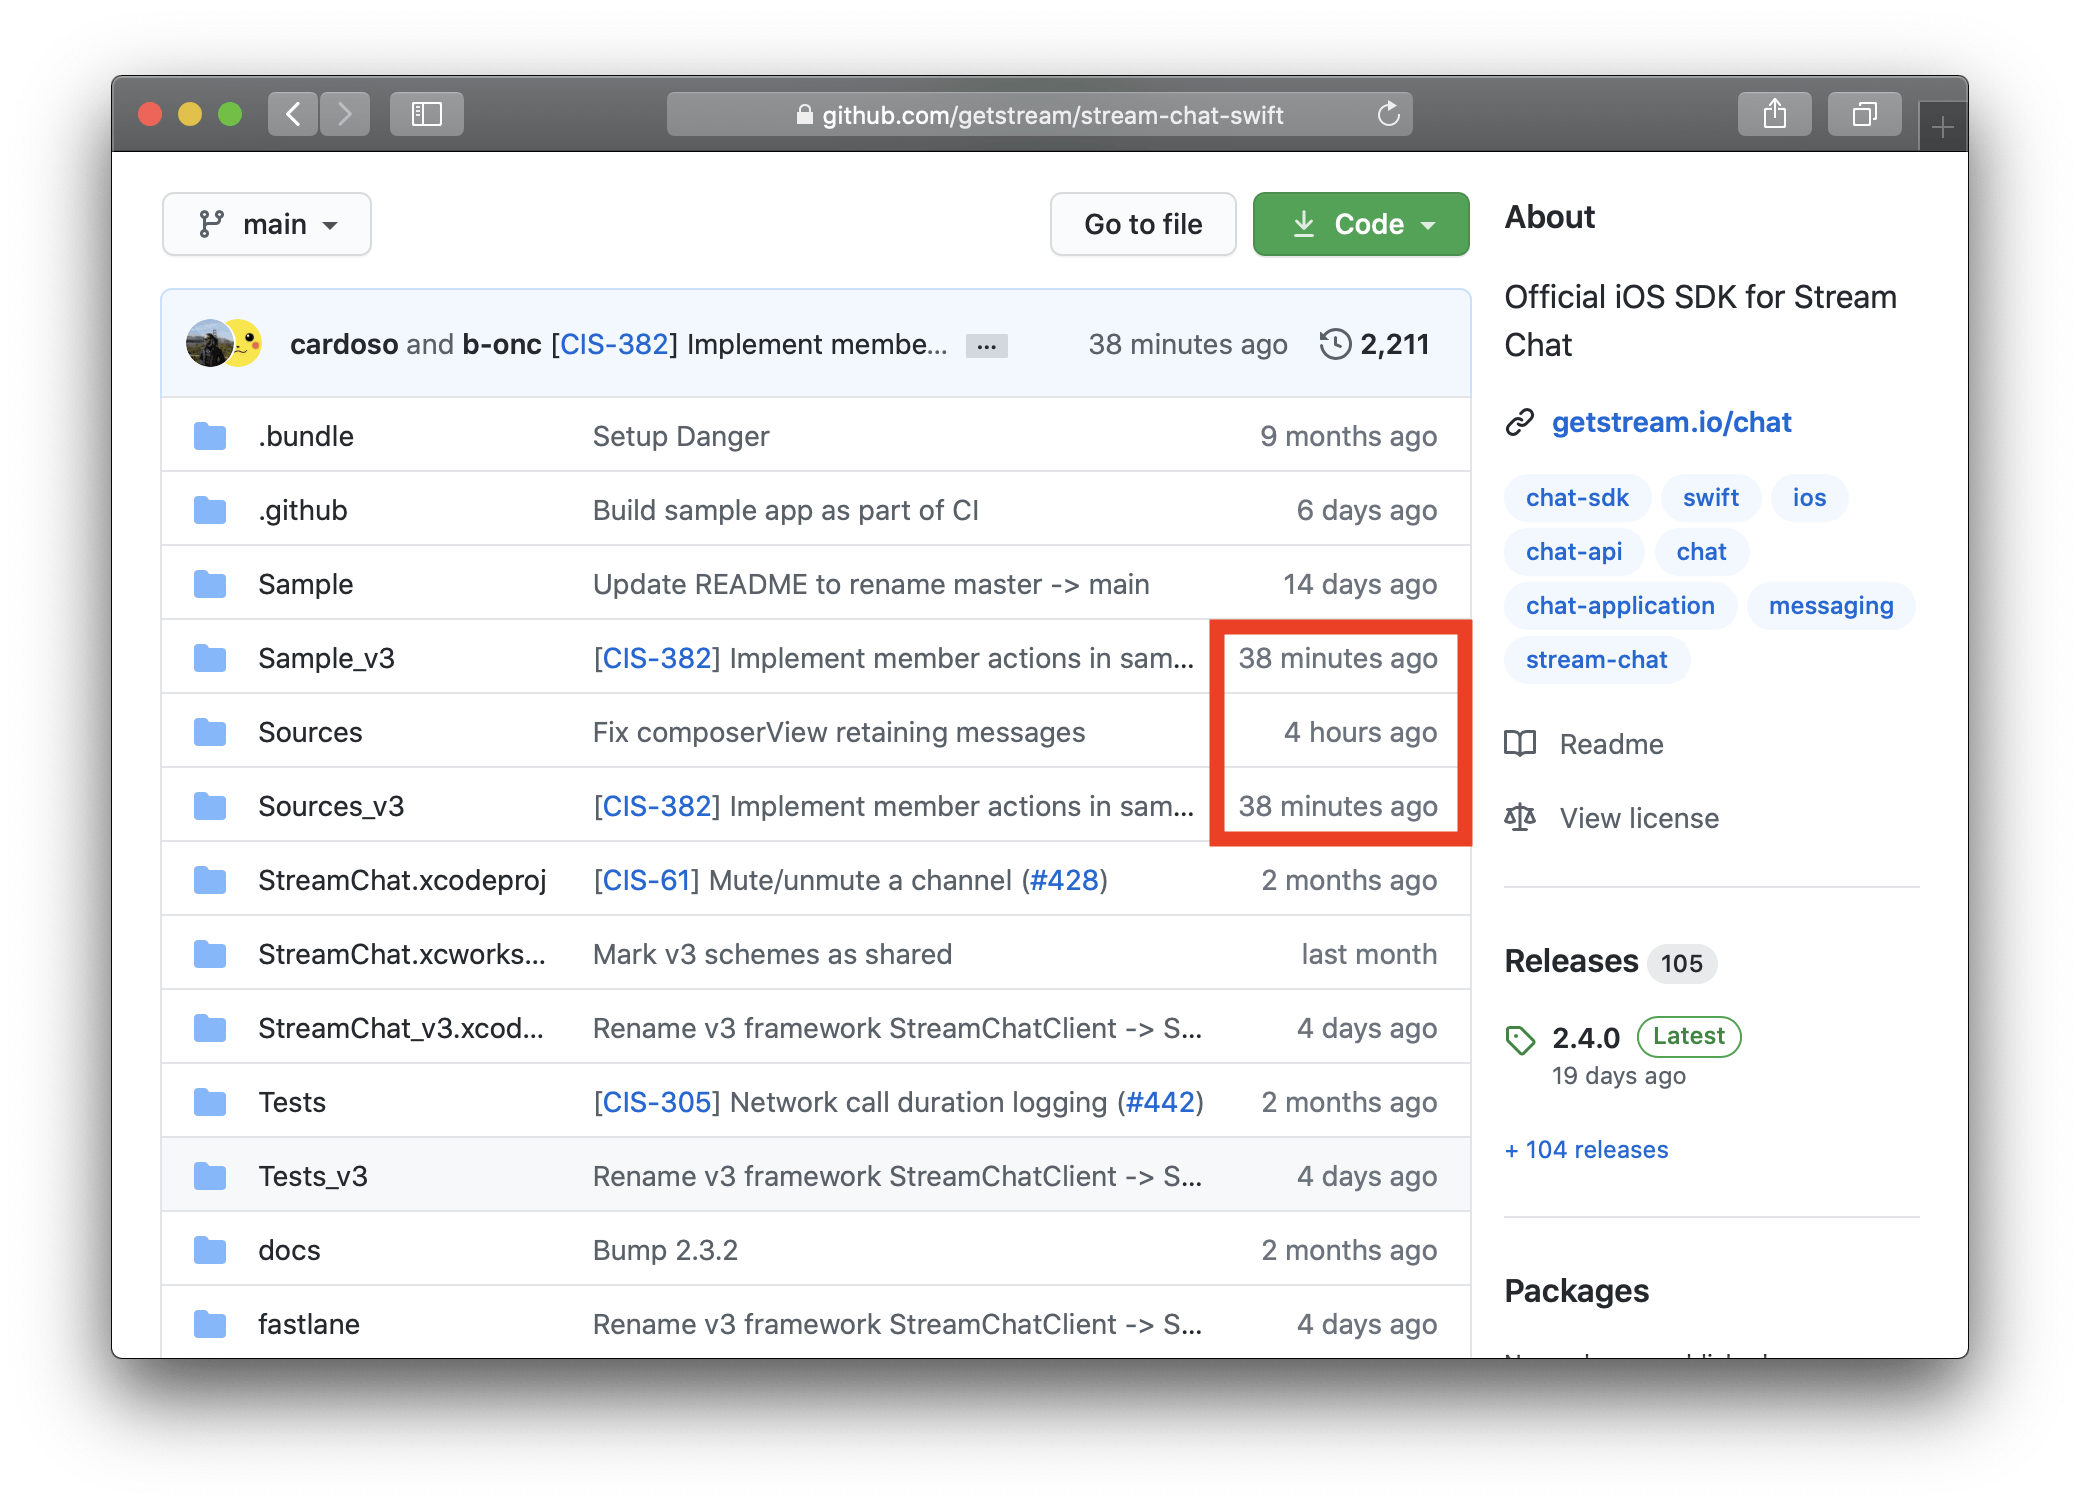 Image shows a GitHub repository in active development